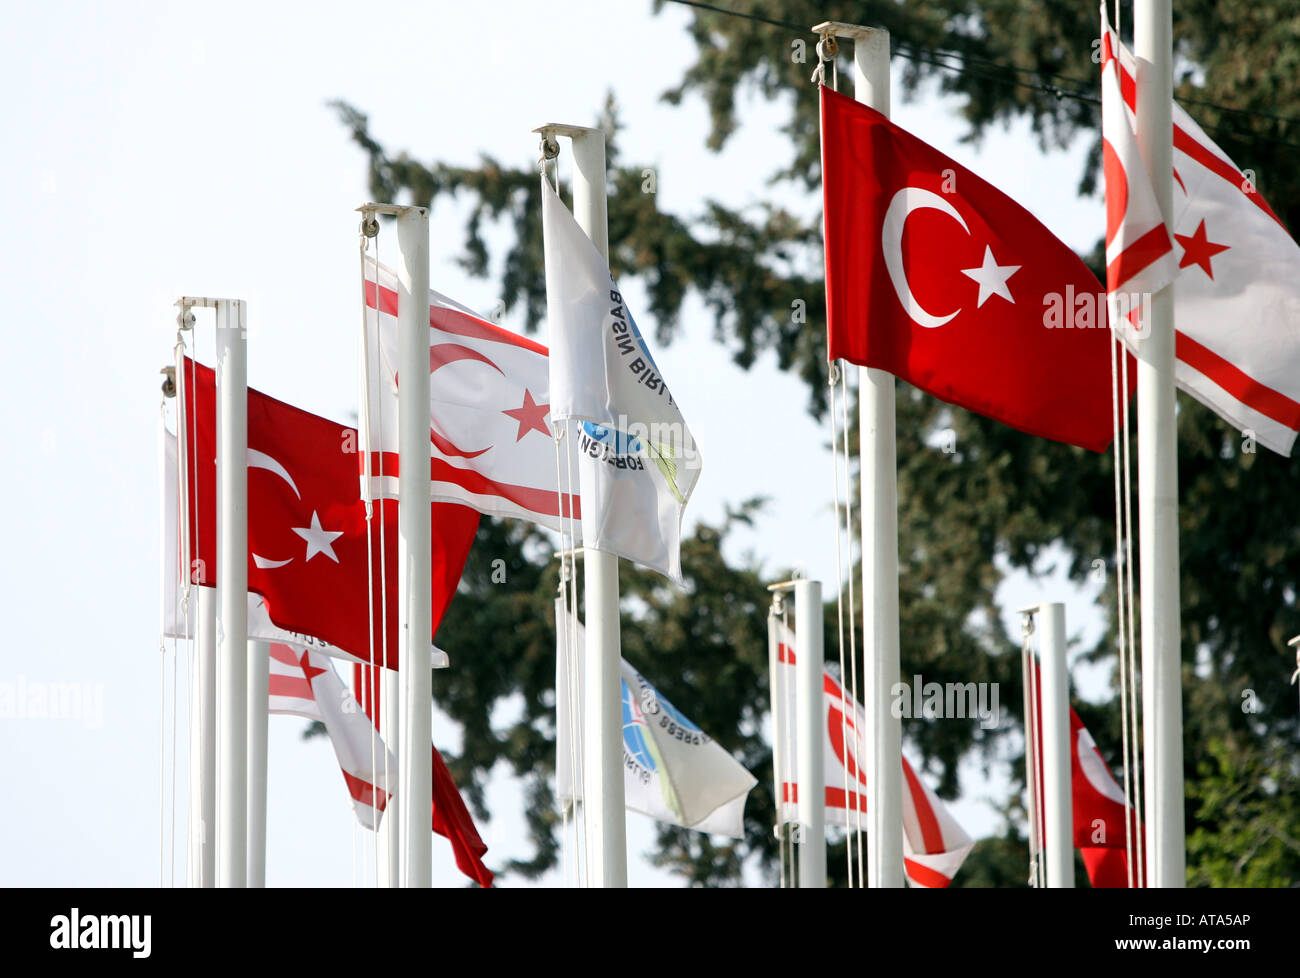 Turkish flags fly close to the border with Greek Cyprus at the Ledra Palace checkpoint the day before the Greek Cypriot s vote i Stock Photo